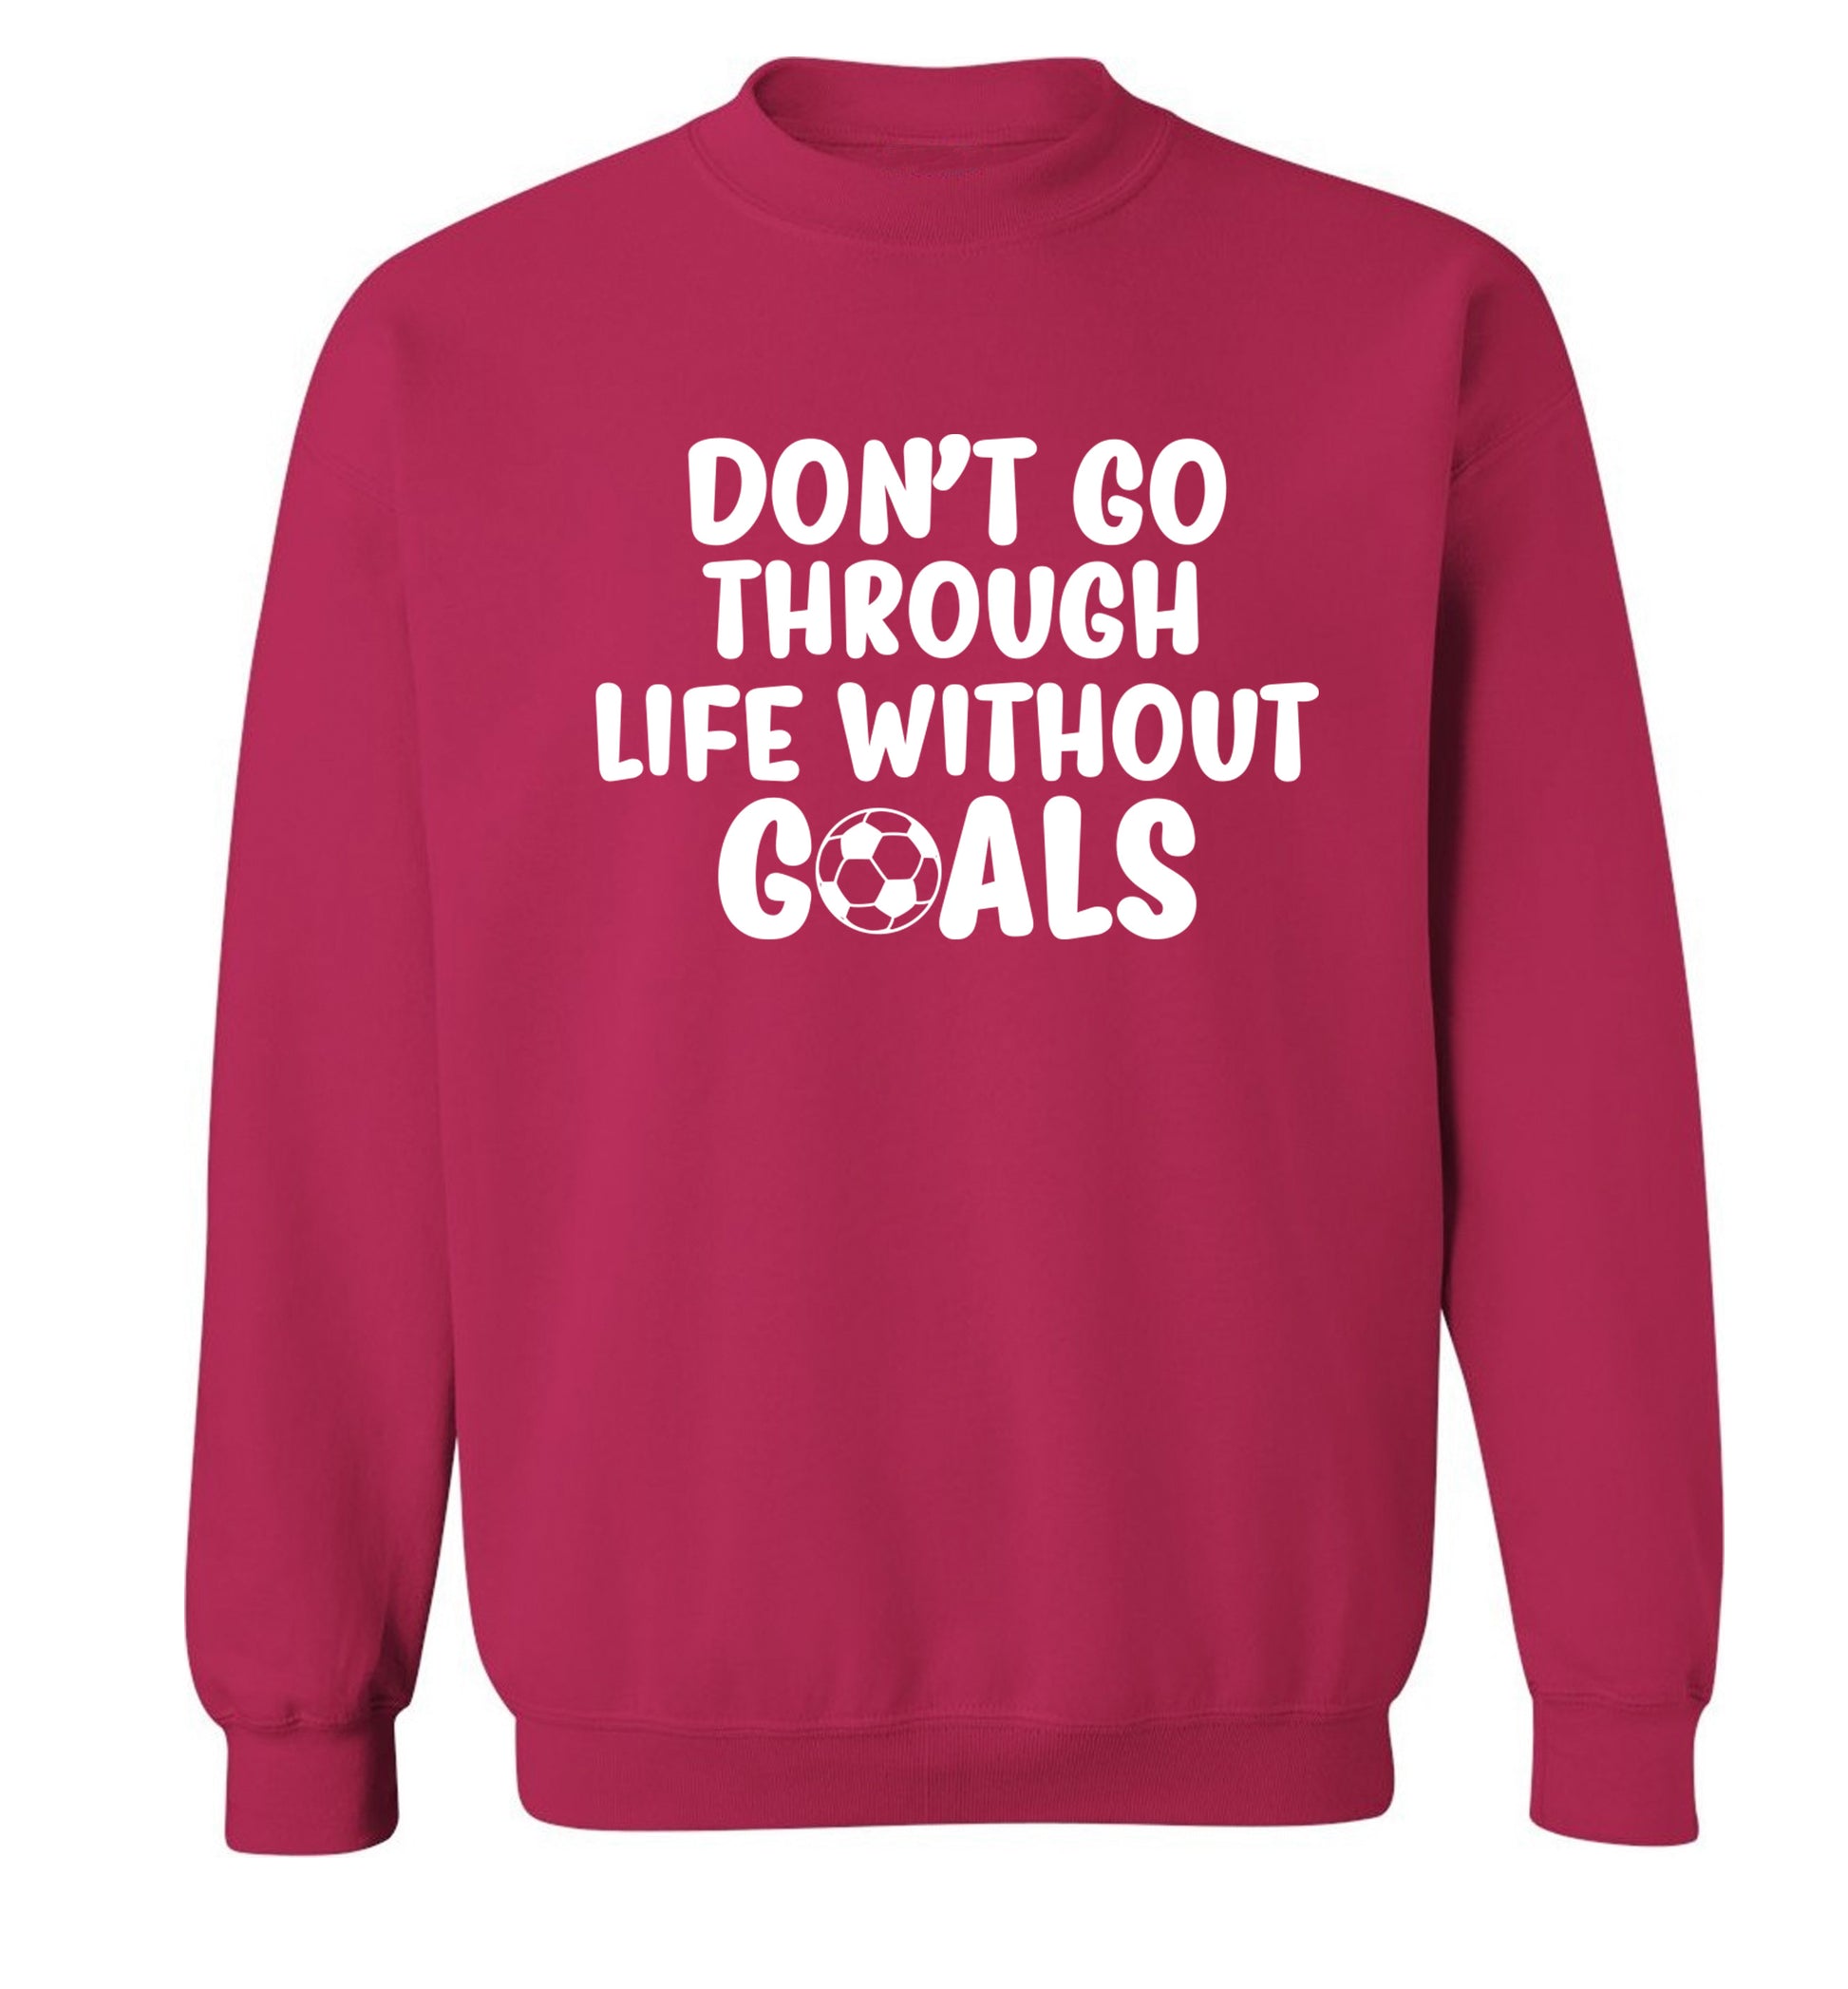 Don't go through life without goals Adult's unisexpink Sweater 2XL